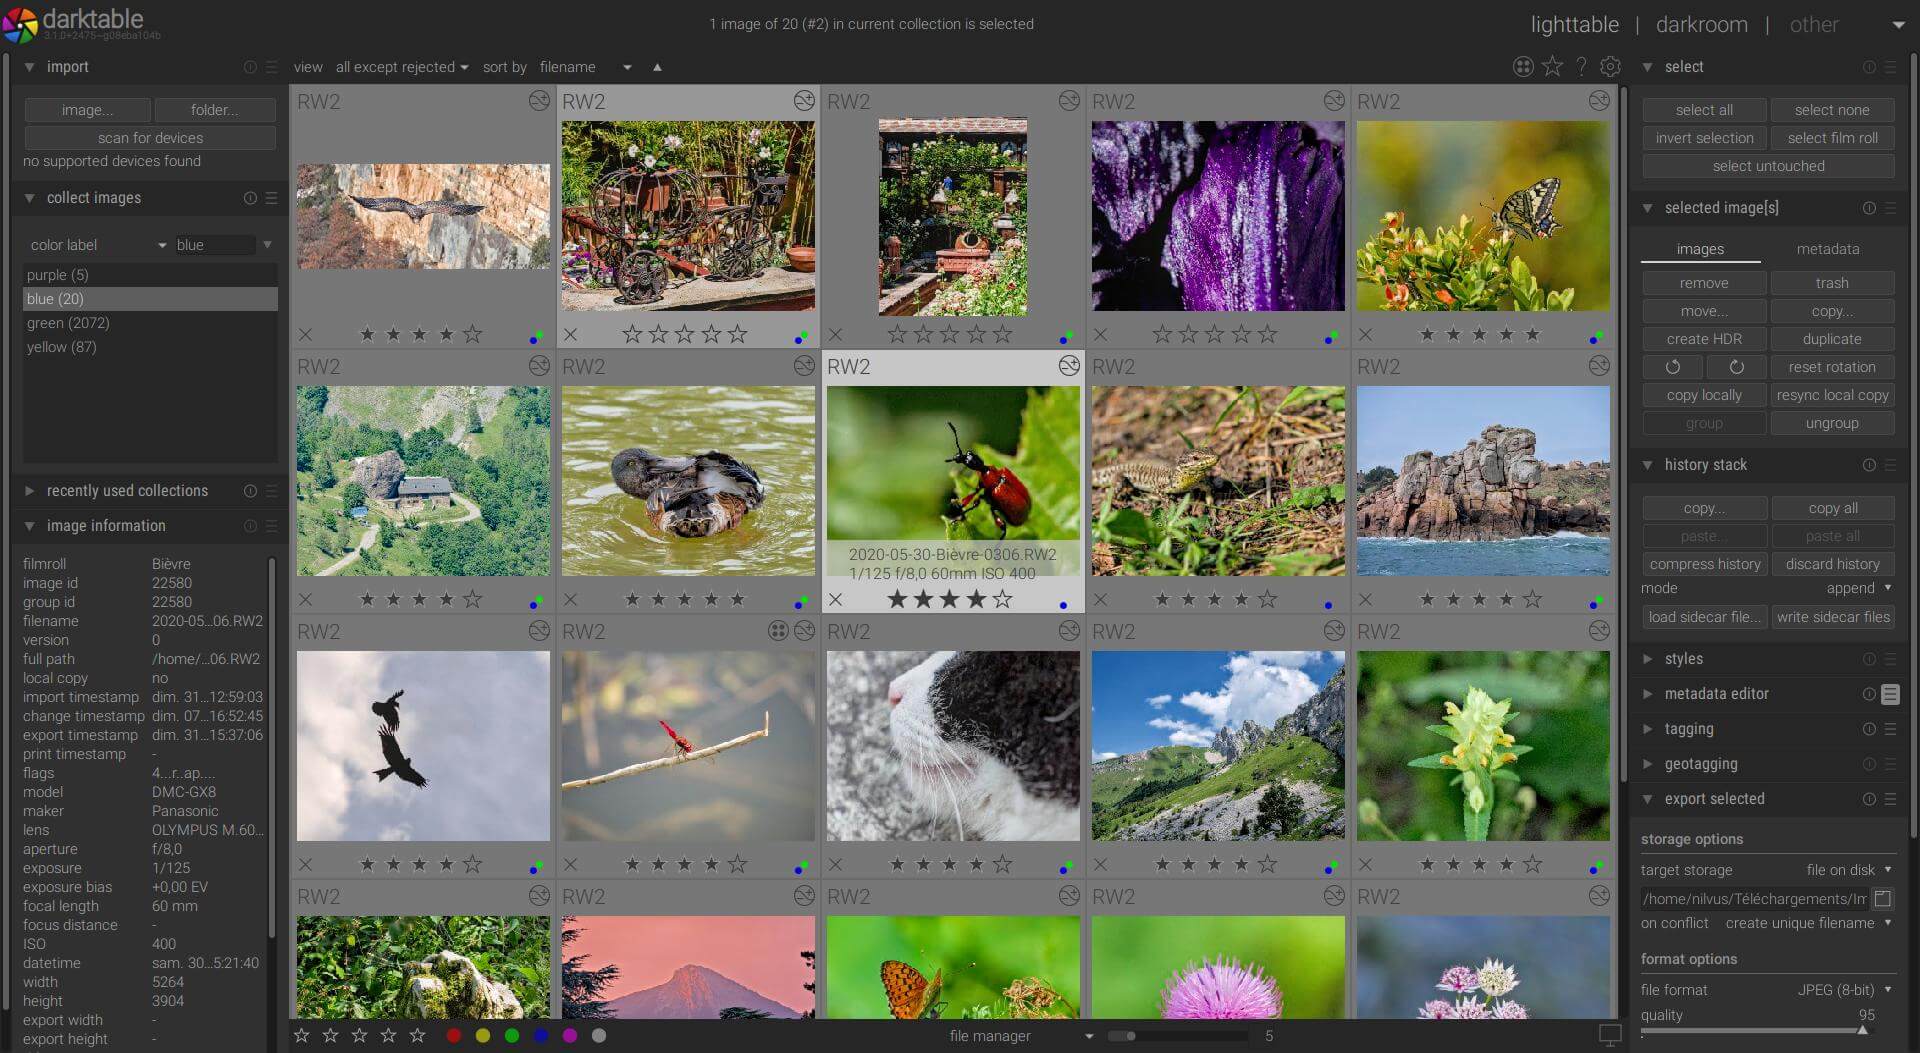 Darktable - Free Photo Editing Software for Photographers